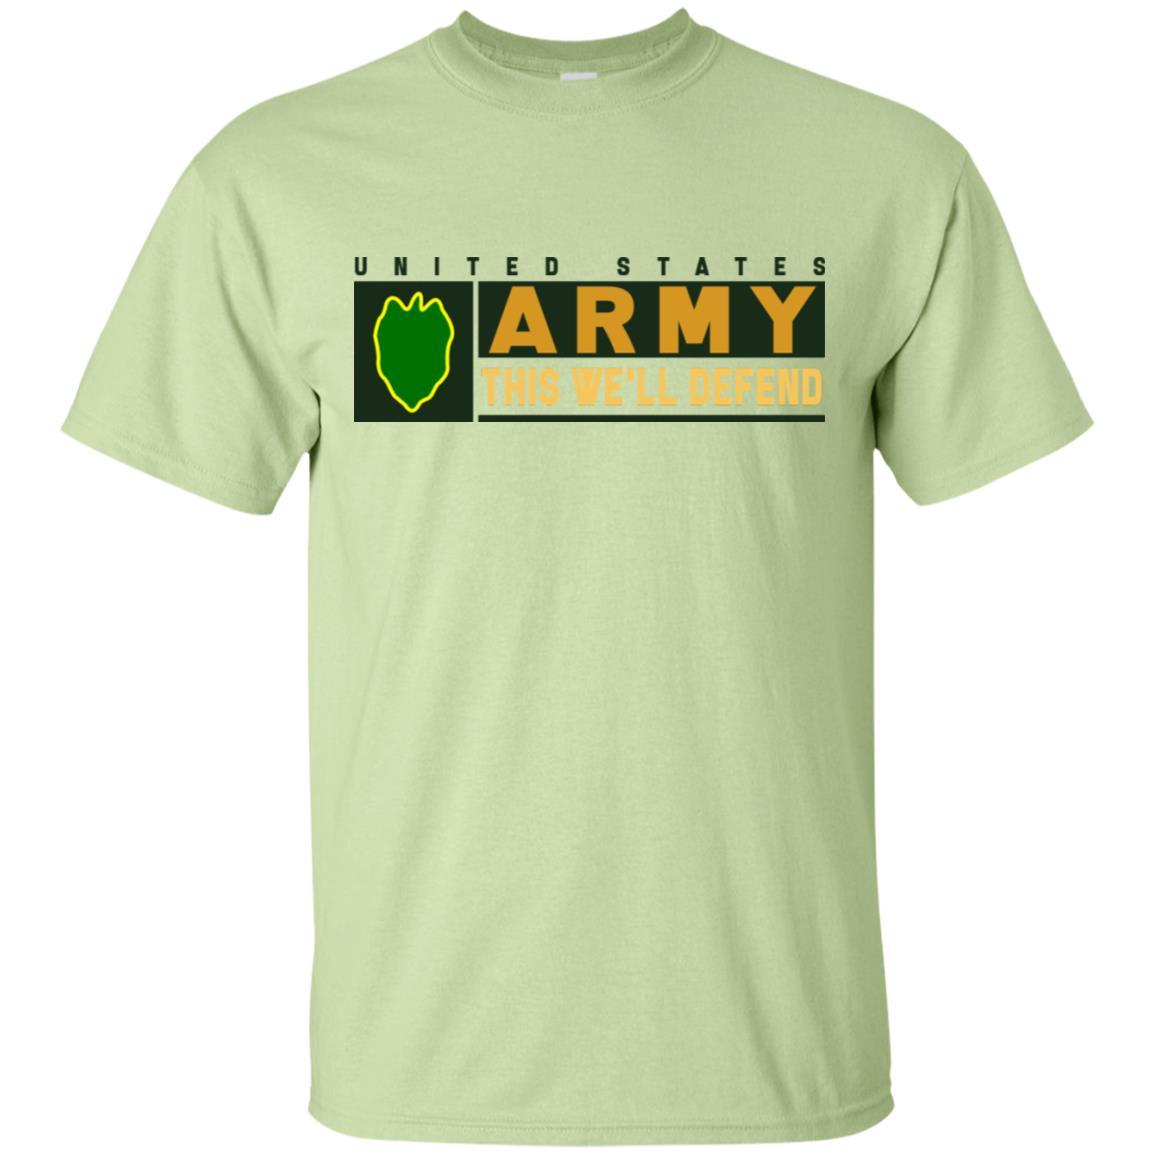 US Army 24th Infantry Division- This We'll Defend T-Shirt On Front For Men-TShirt-Army-Veterans Nation